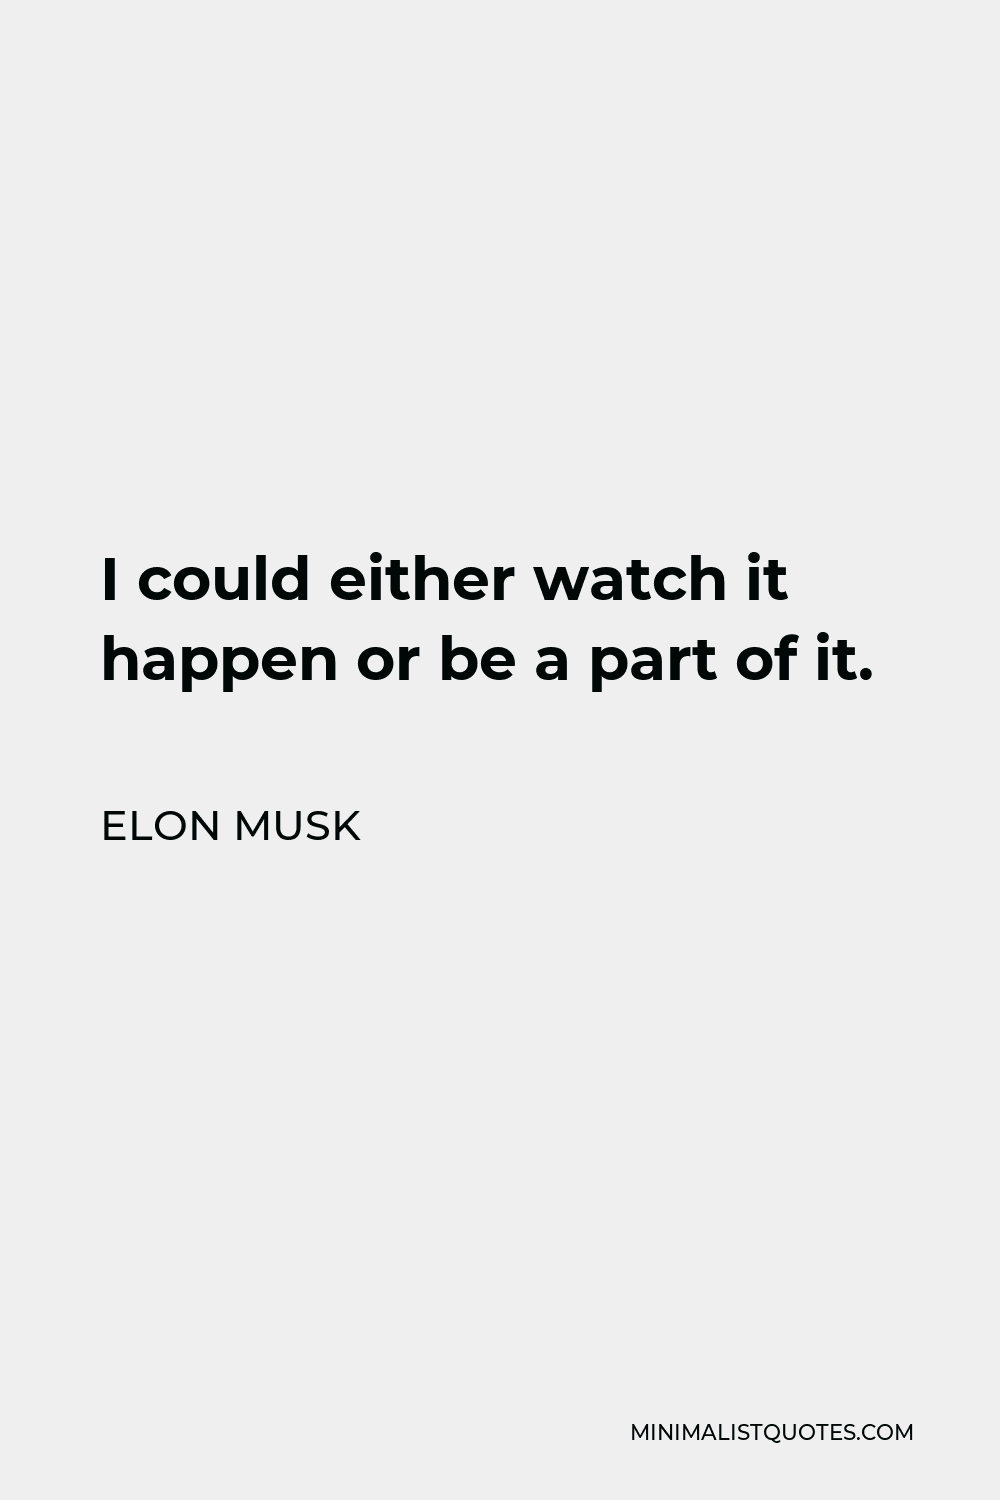 Elon Musk Quote - I could either watch it happen or be a part of it.